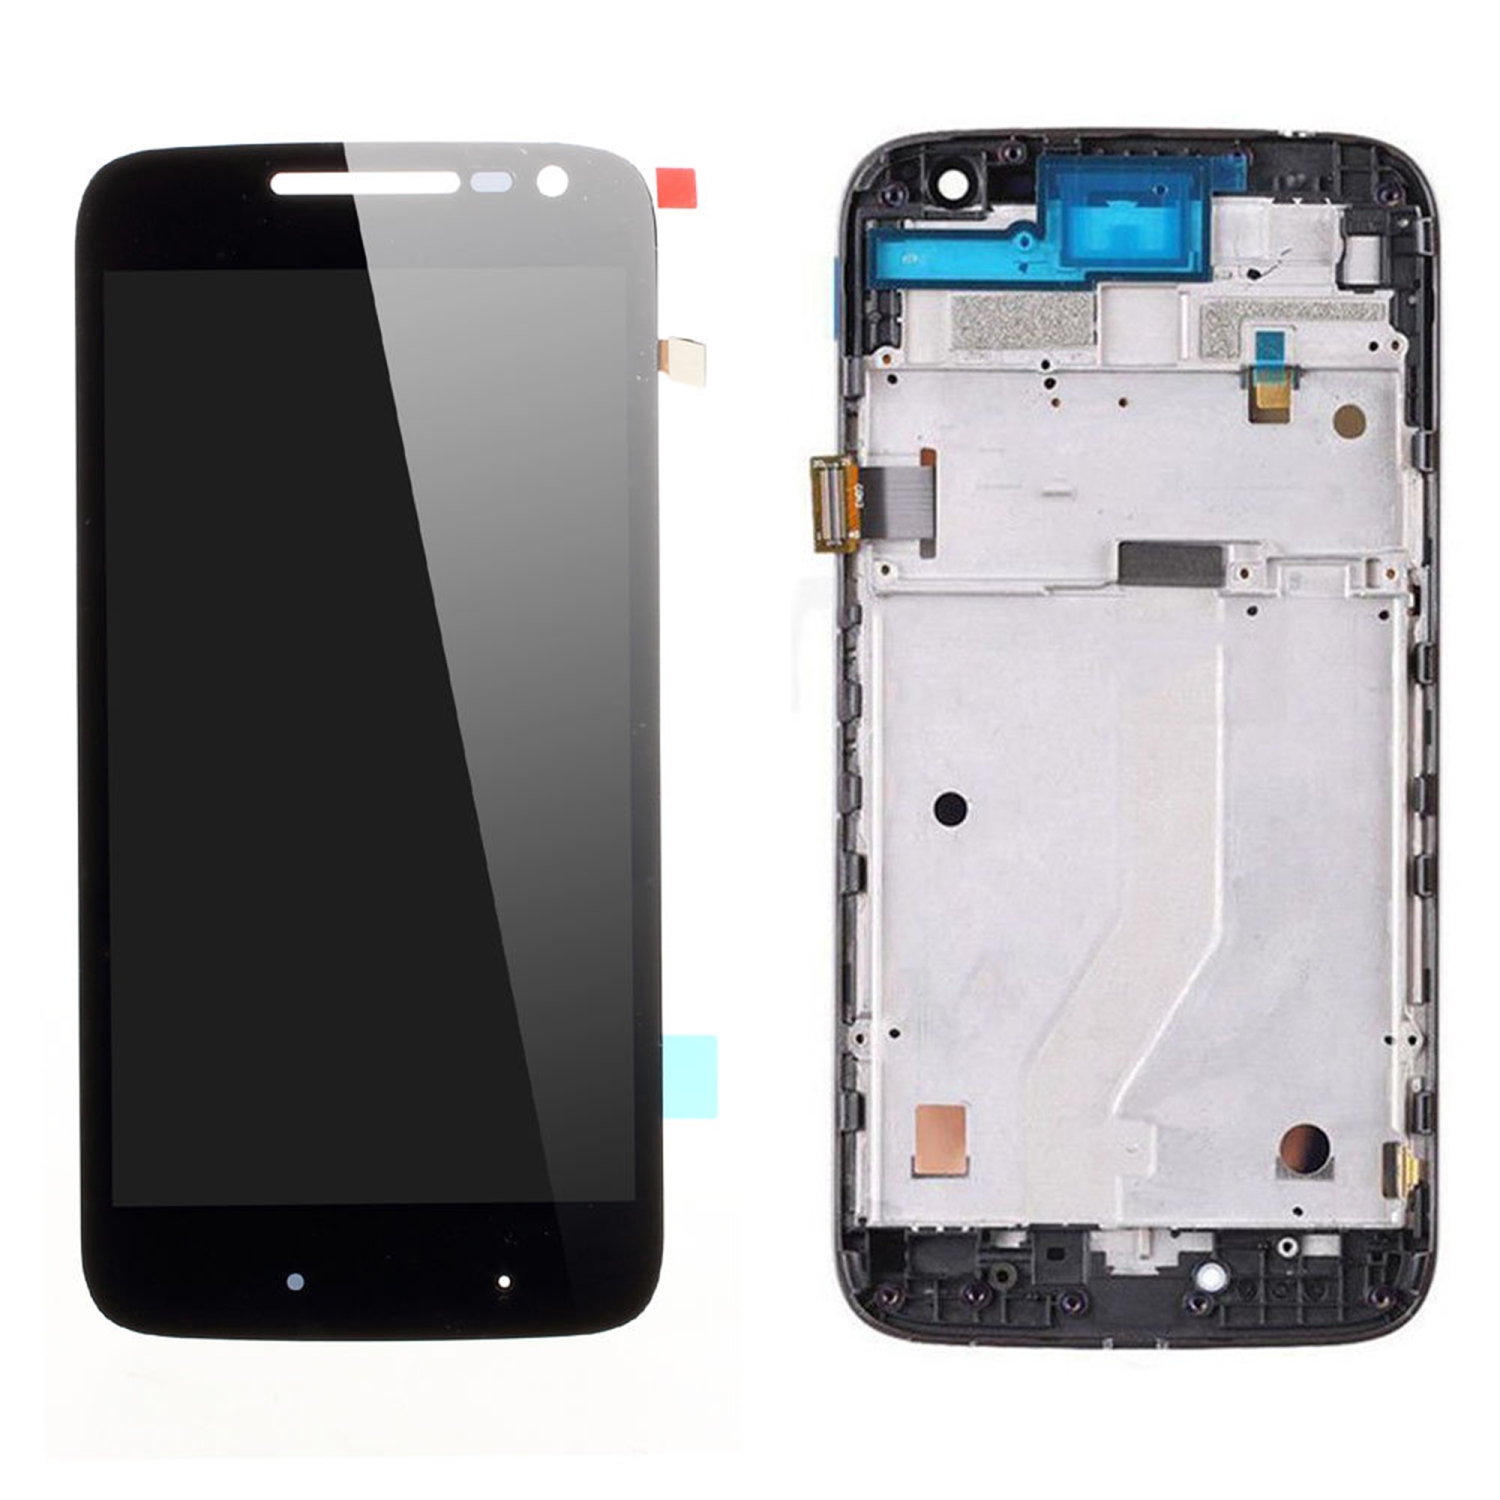 Motorola Moto G4 Play LCD Digitizer Assembly with Frame - Black